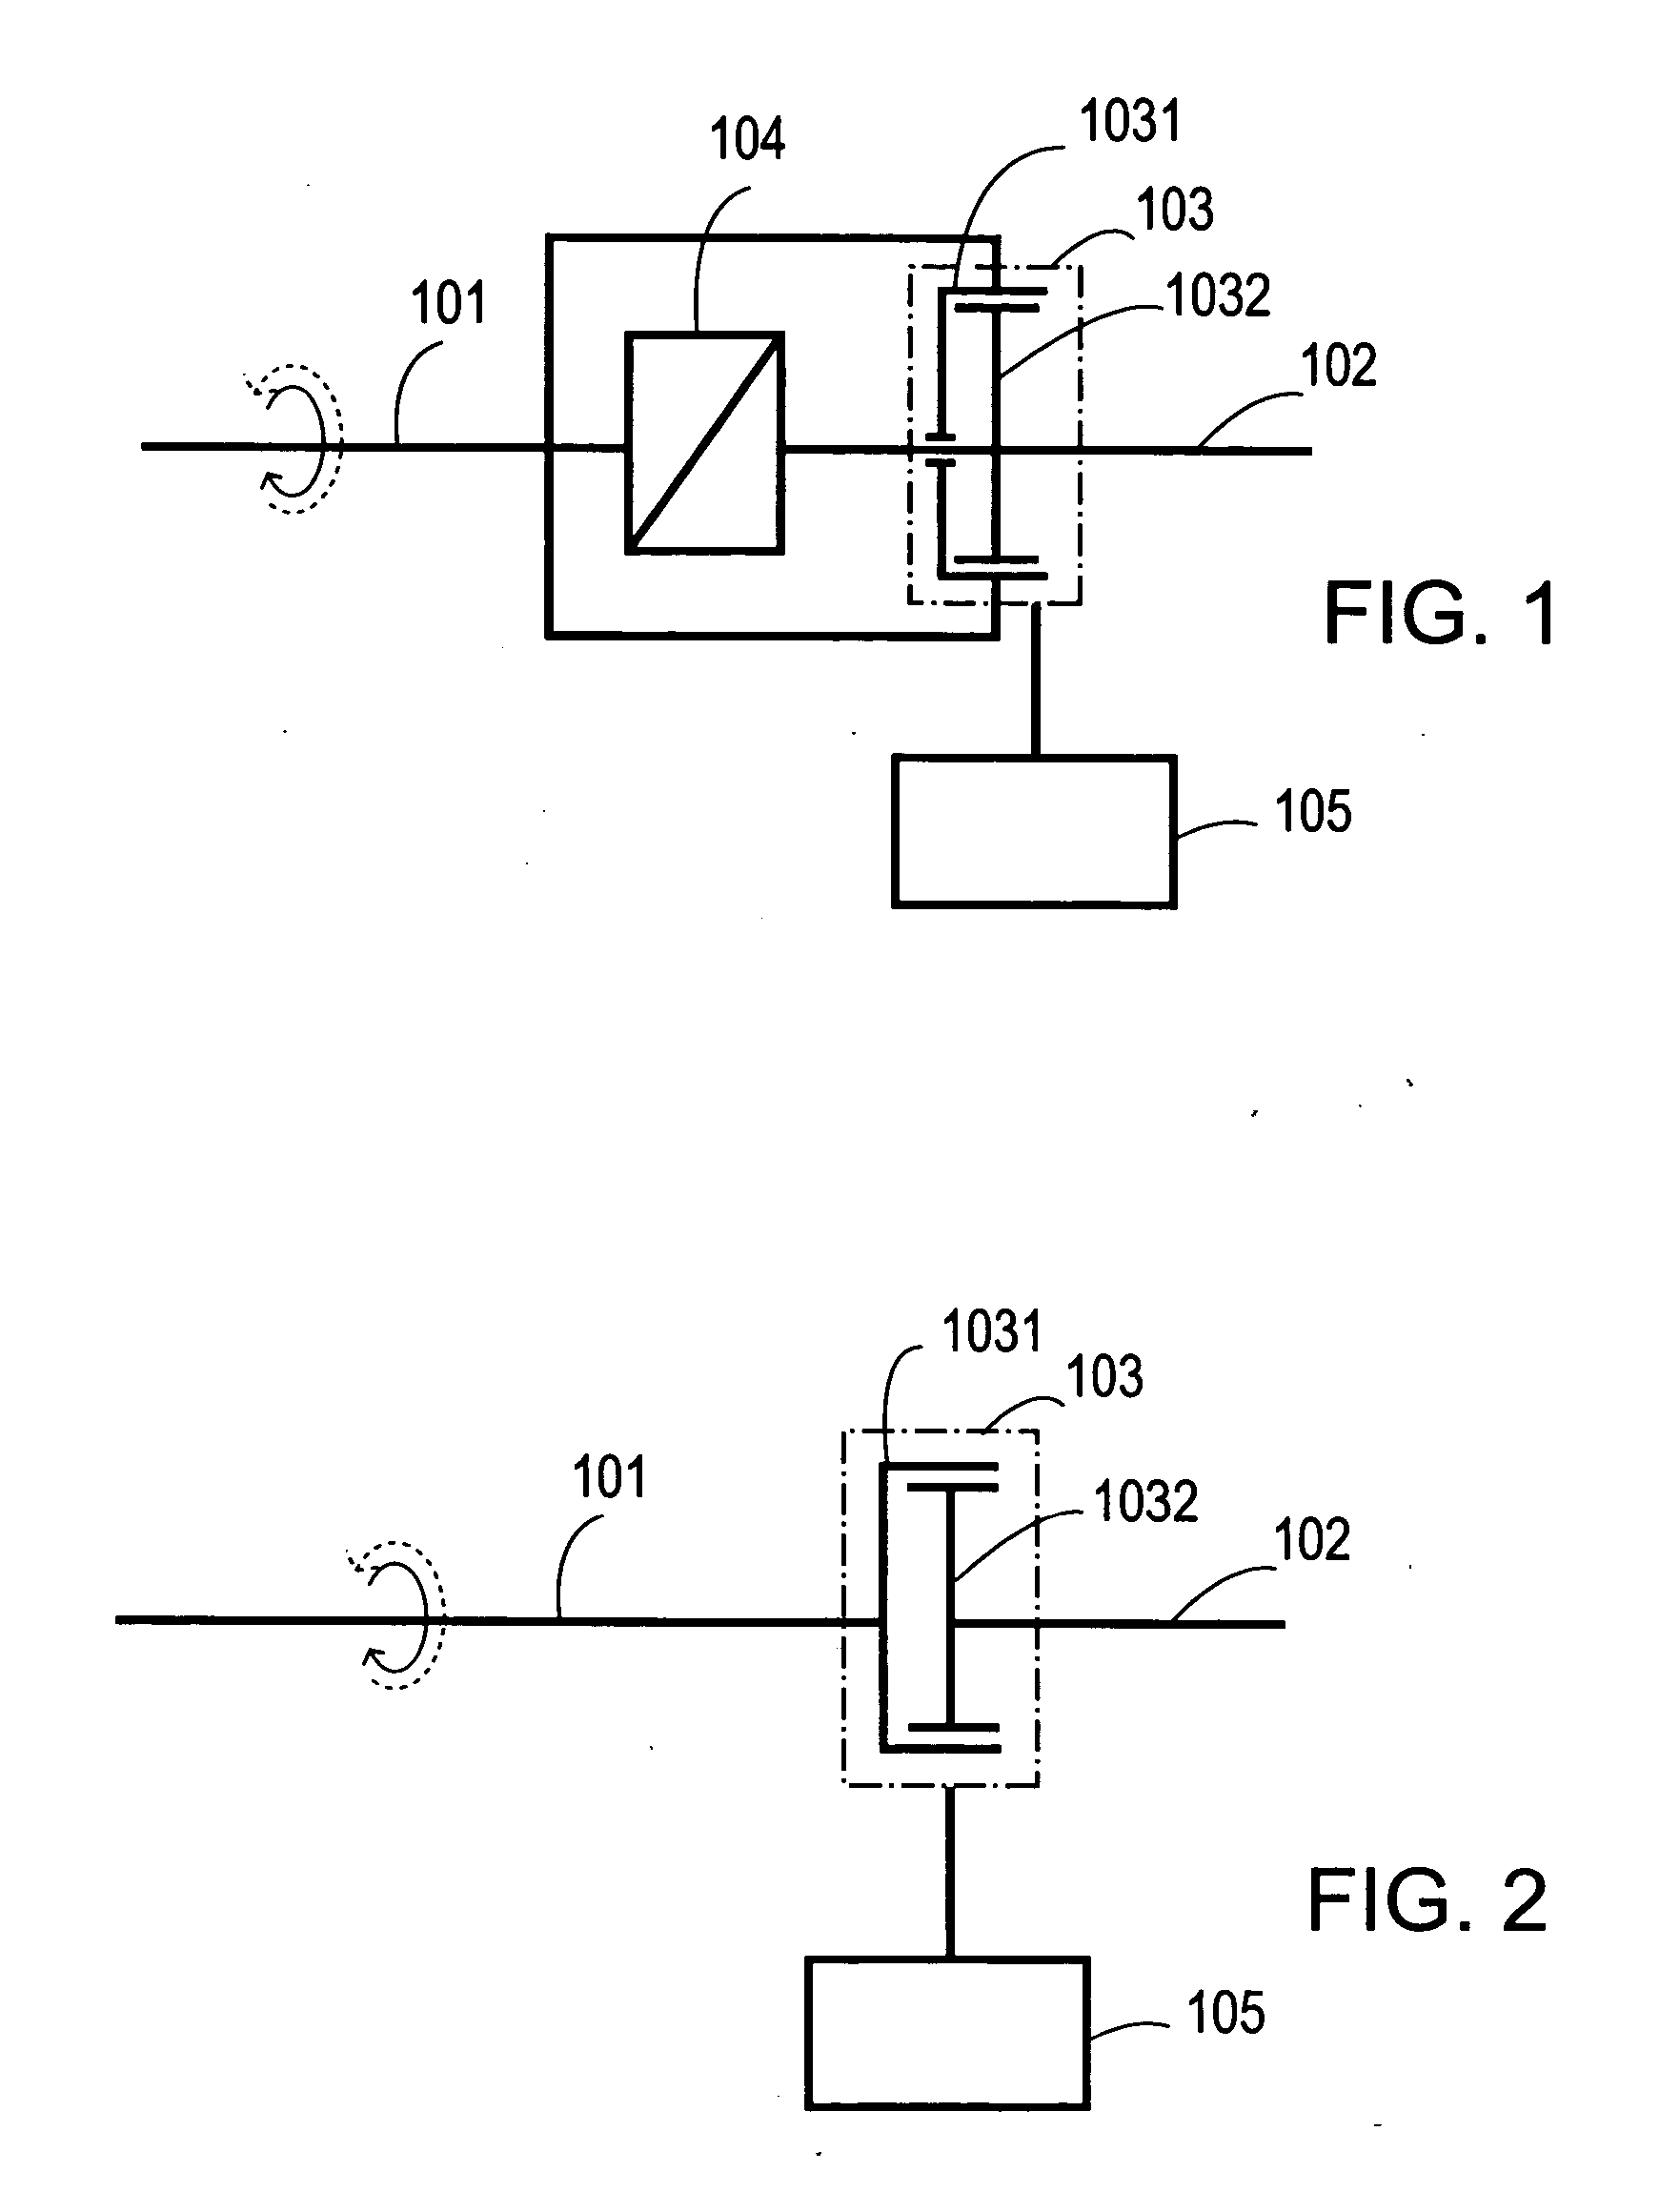 Bidirectional coupling device with variable transmission characteristics